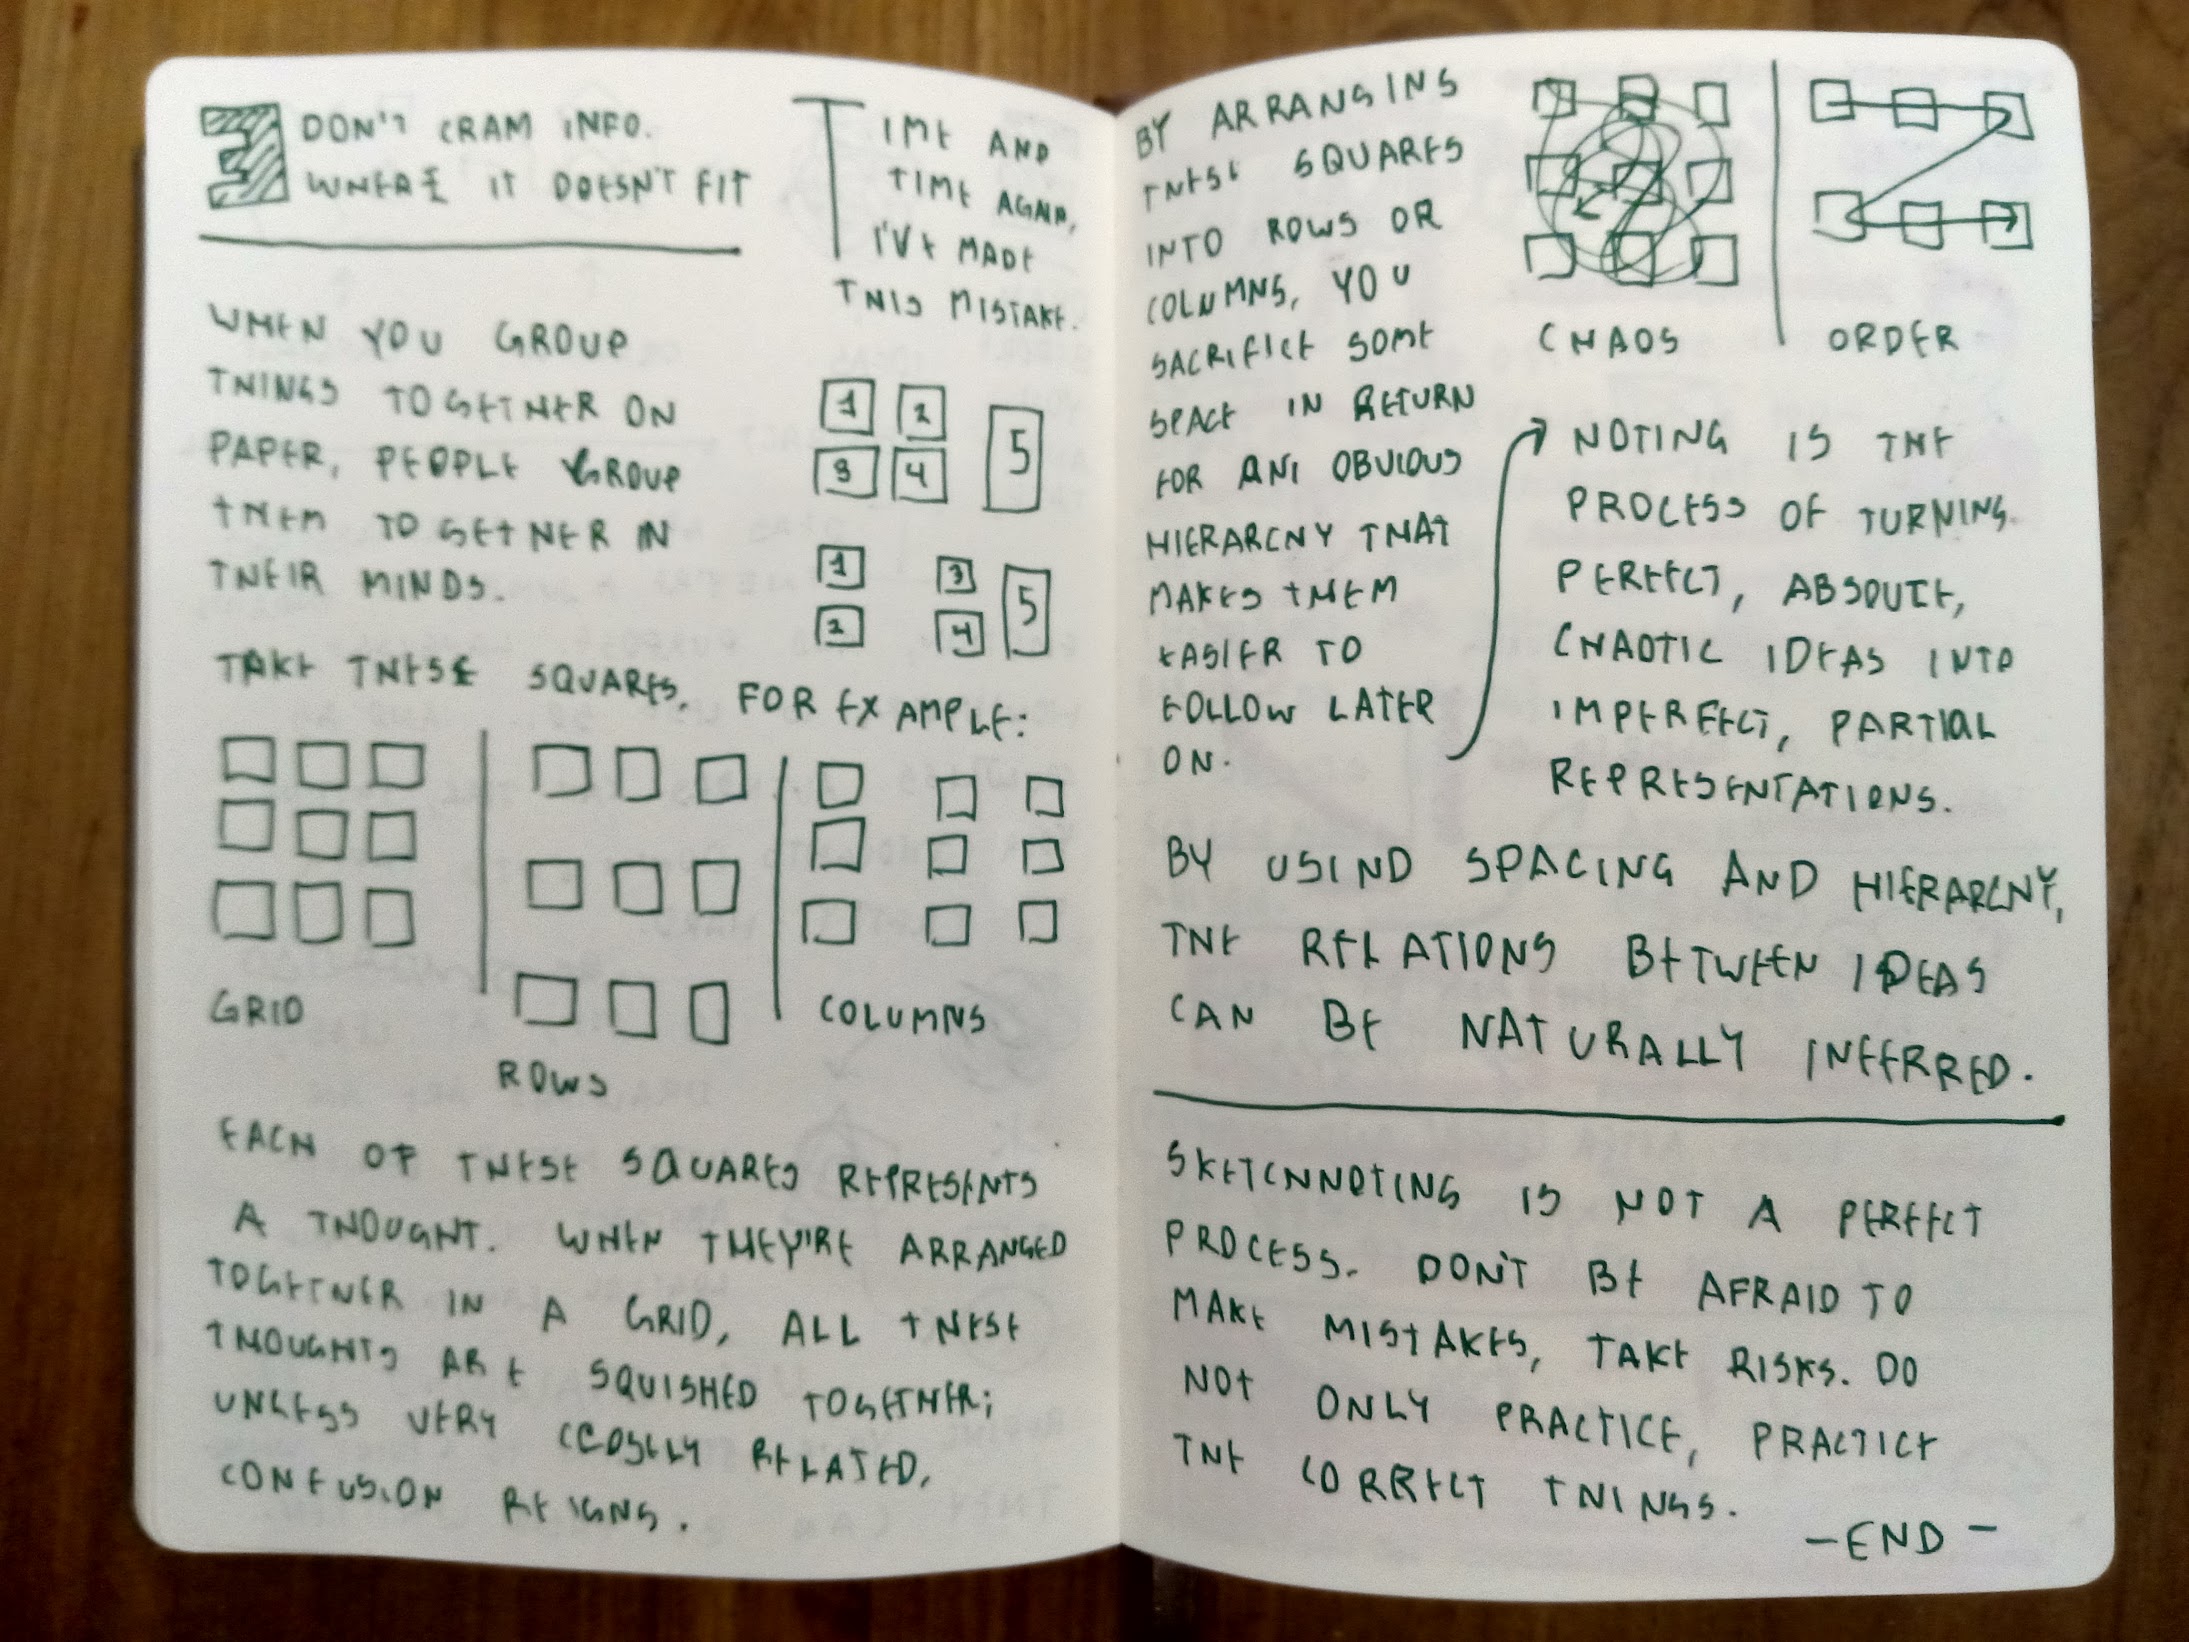 The third and final spread of sketchnotes.